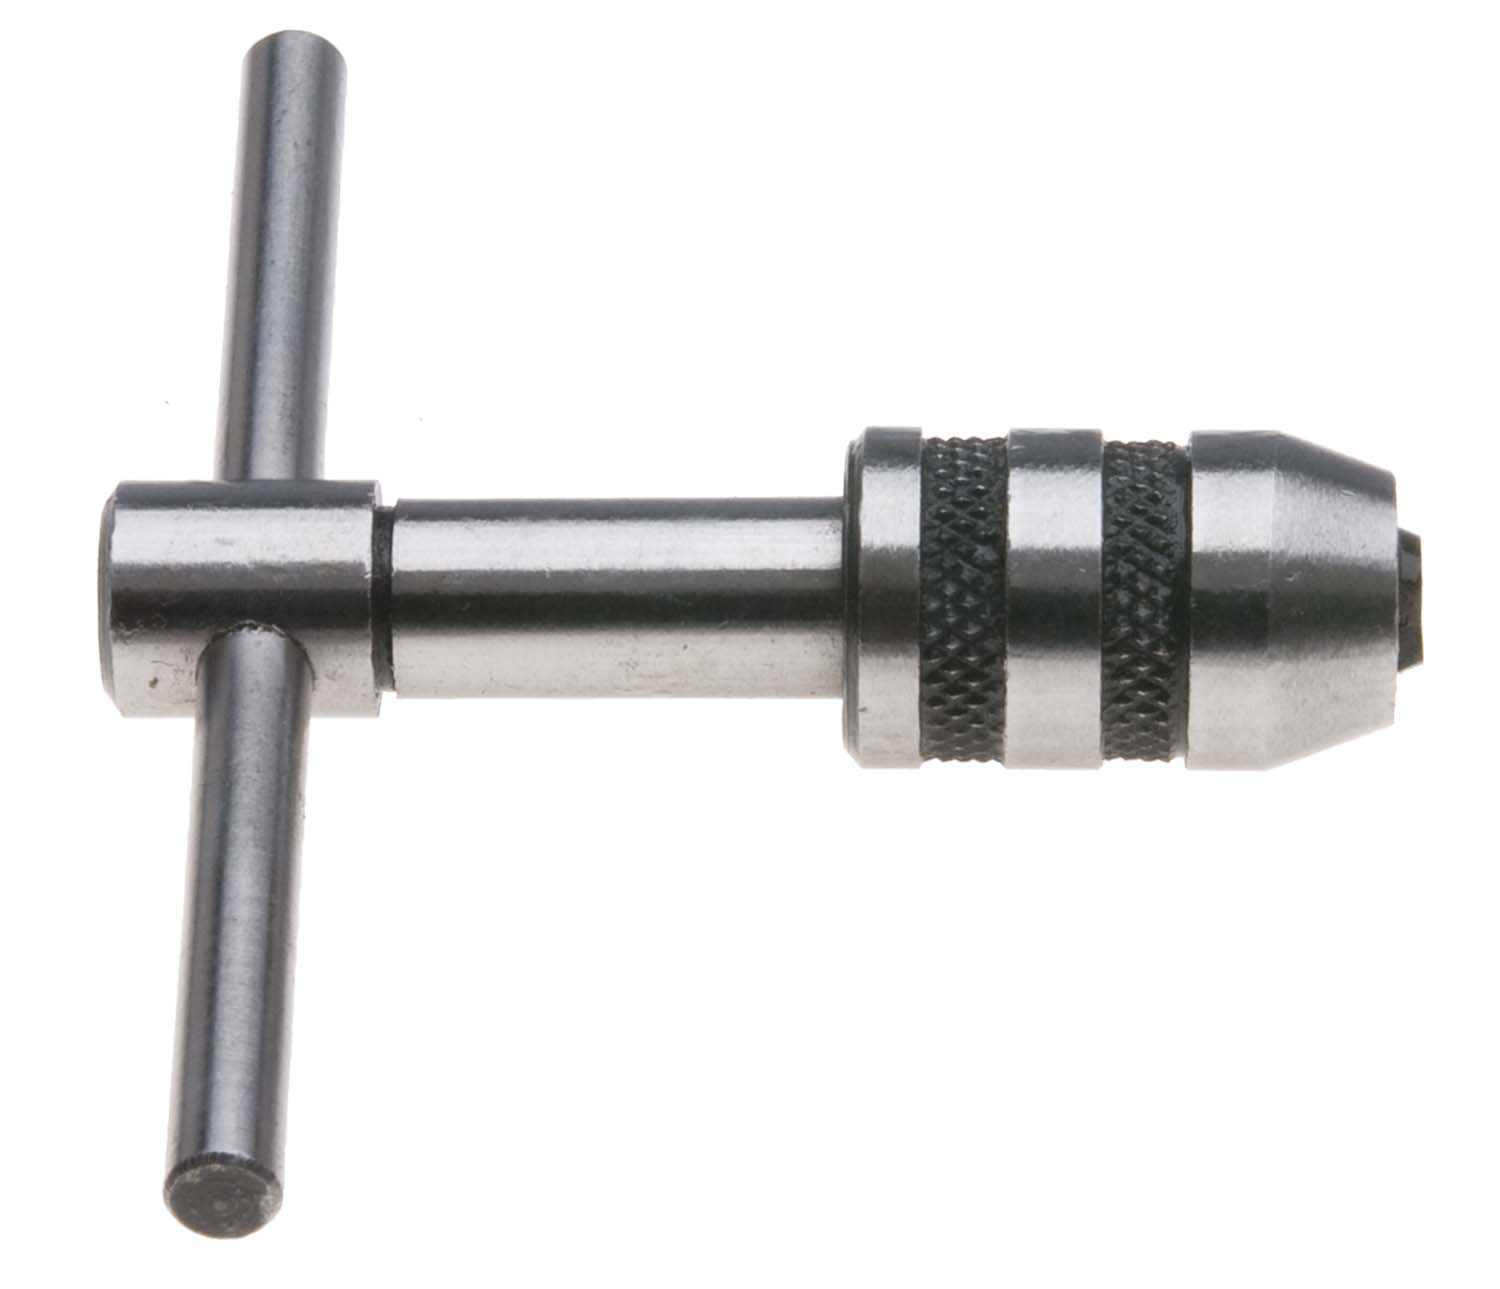 MT-056   Plain T-Handle Tap Wrench for #4 - 1/4" taps